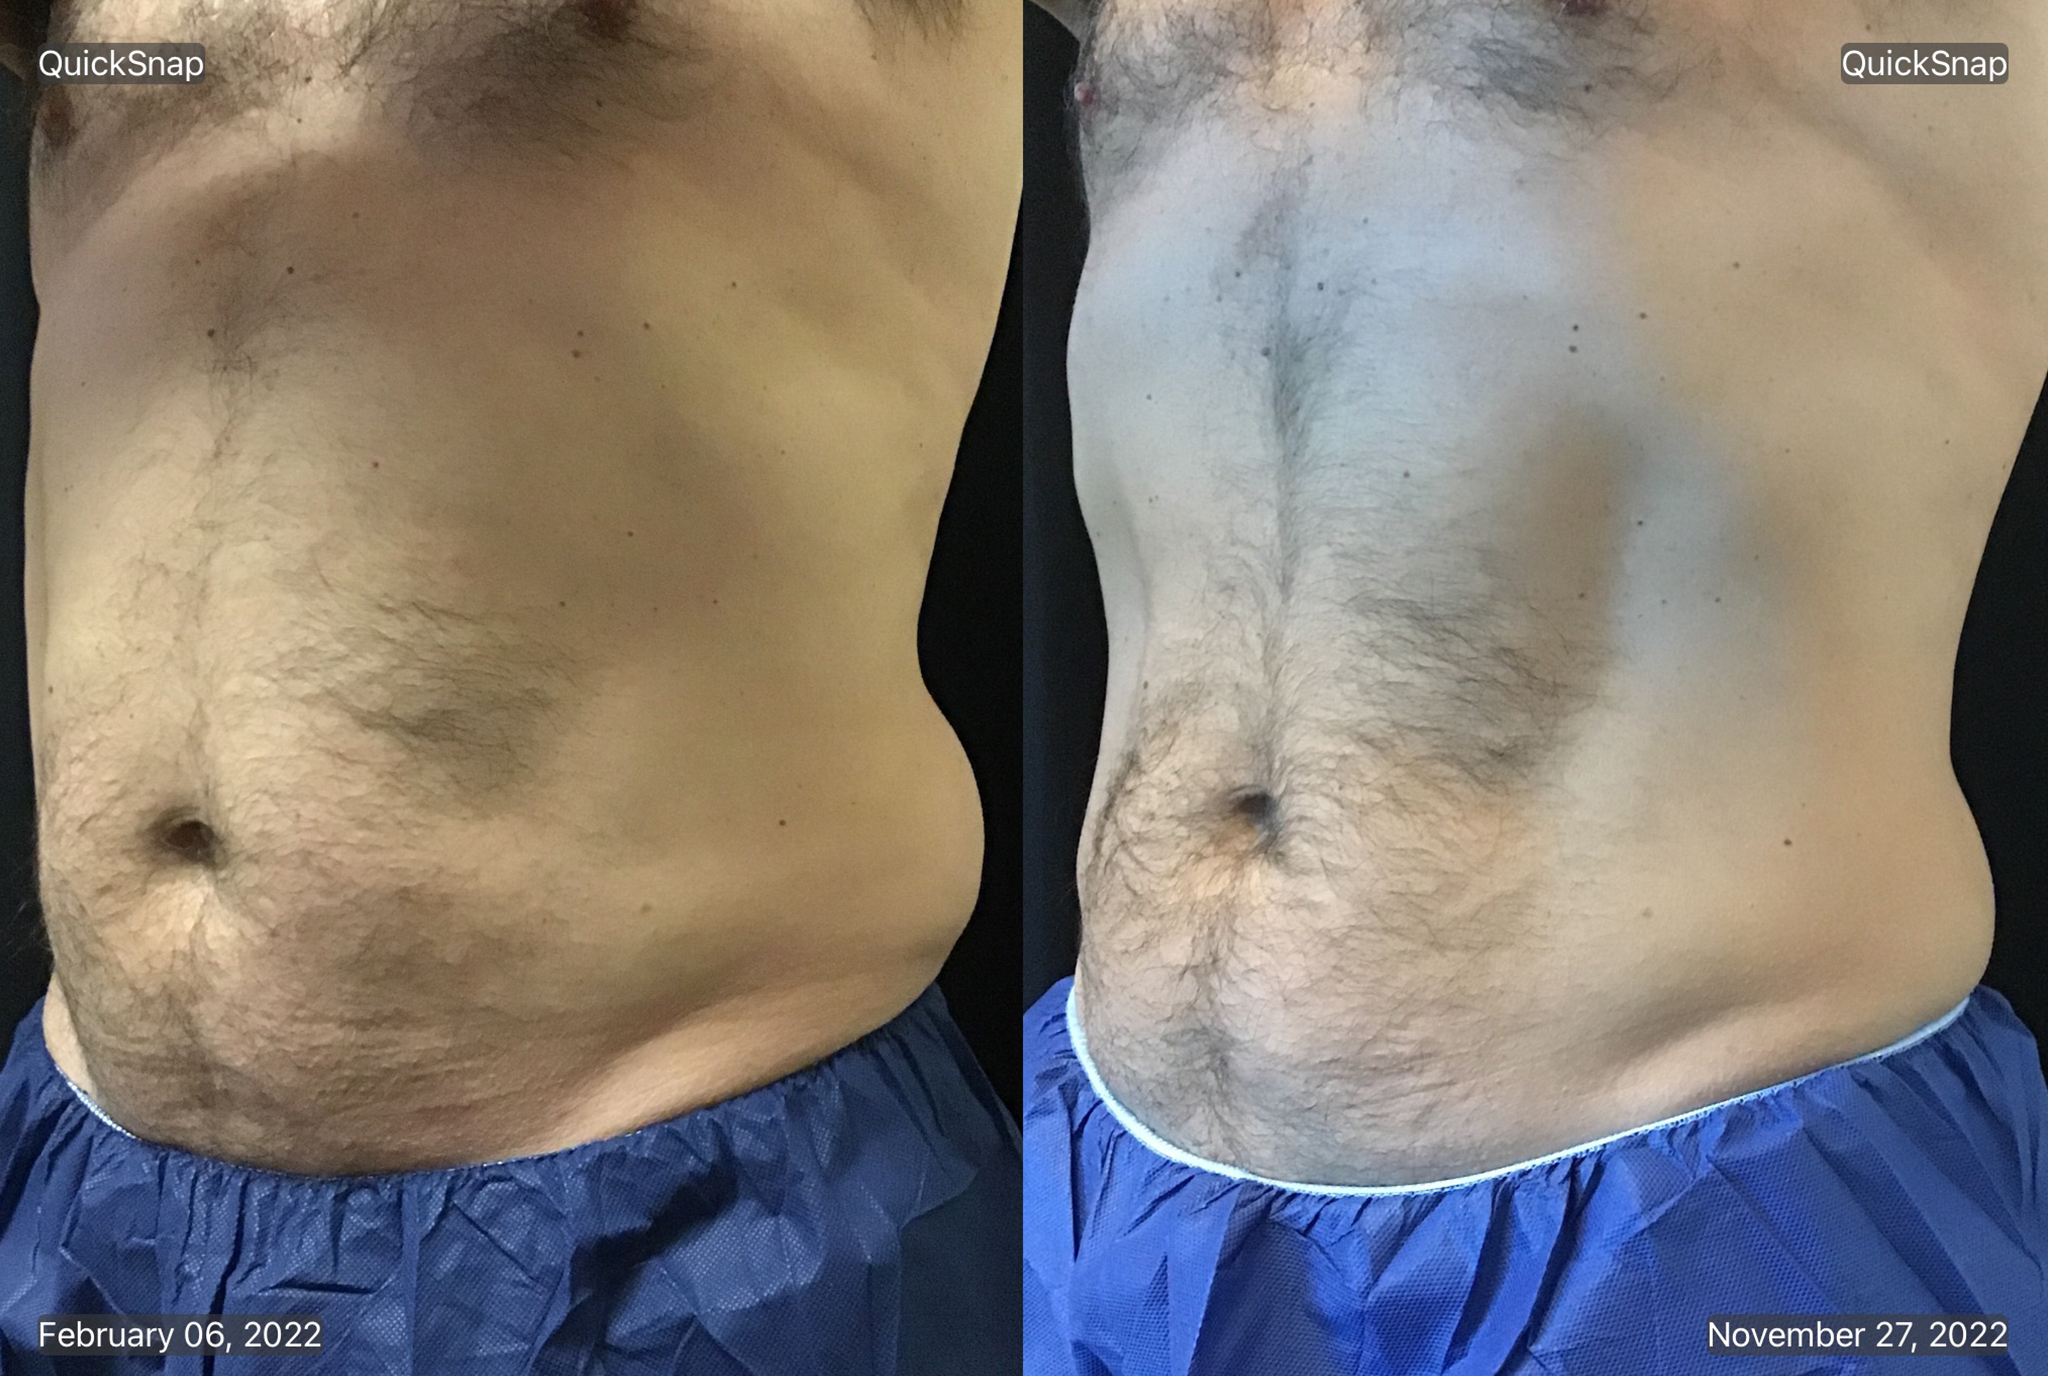 coolsculpting-abdomen-before-and-after-photo